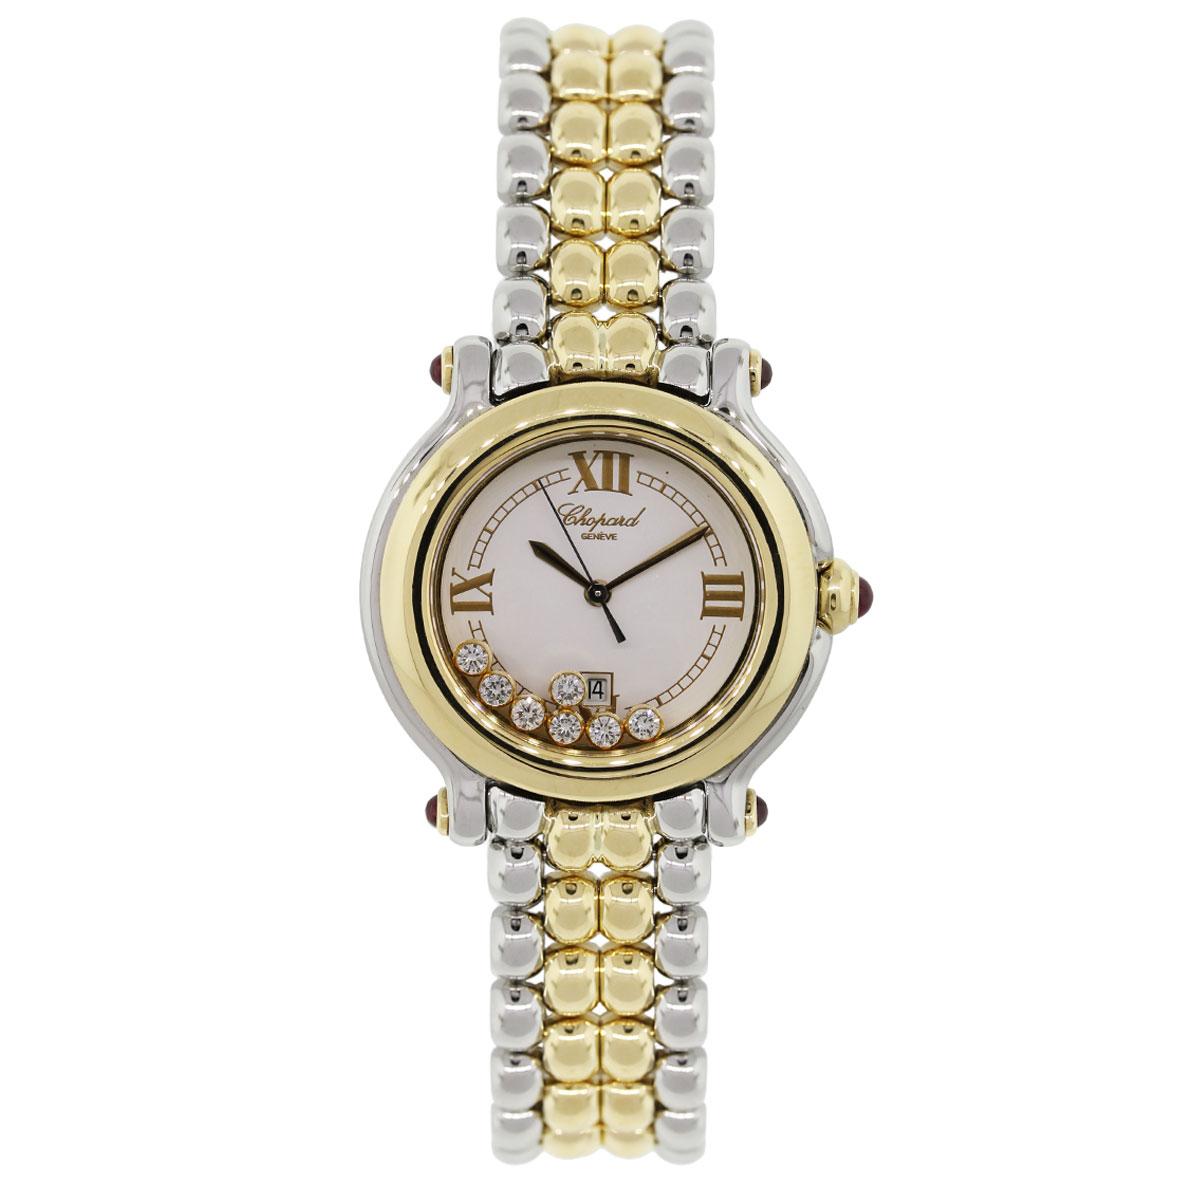 Brand: Chopard
Model: Happy Sport
Case Material: Stainless Steel
Case Diameter: 32mm
Bezel: Smooth 18k yellow gold bezel
Dial: White dial with floating diamonds
Bracelet: 18k yellow gold and stainless steel band
Crystal: Sapphire
Size: Will fit up